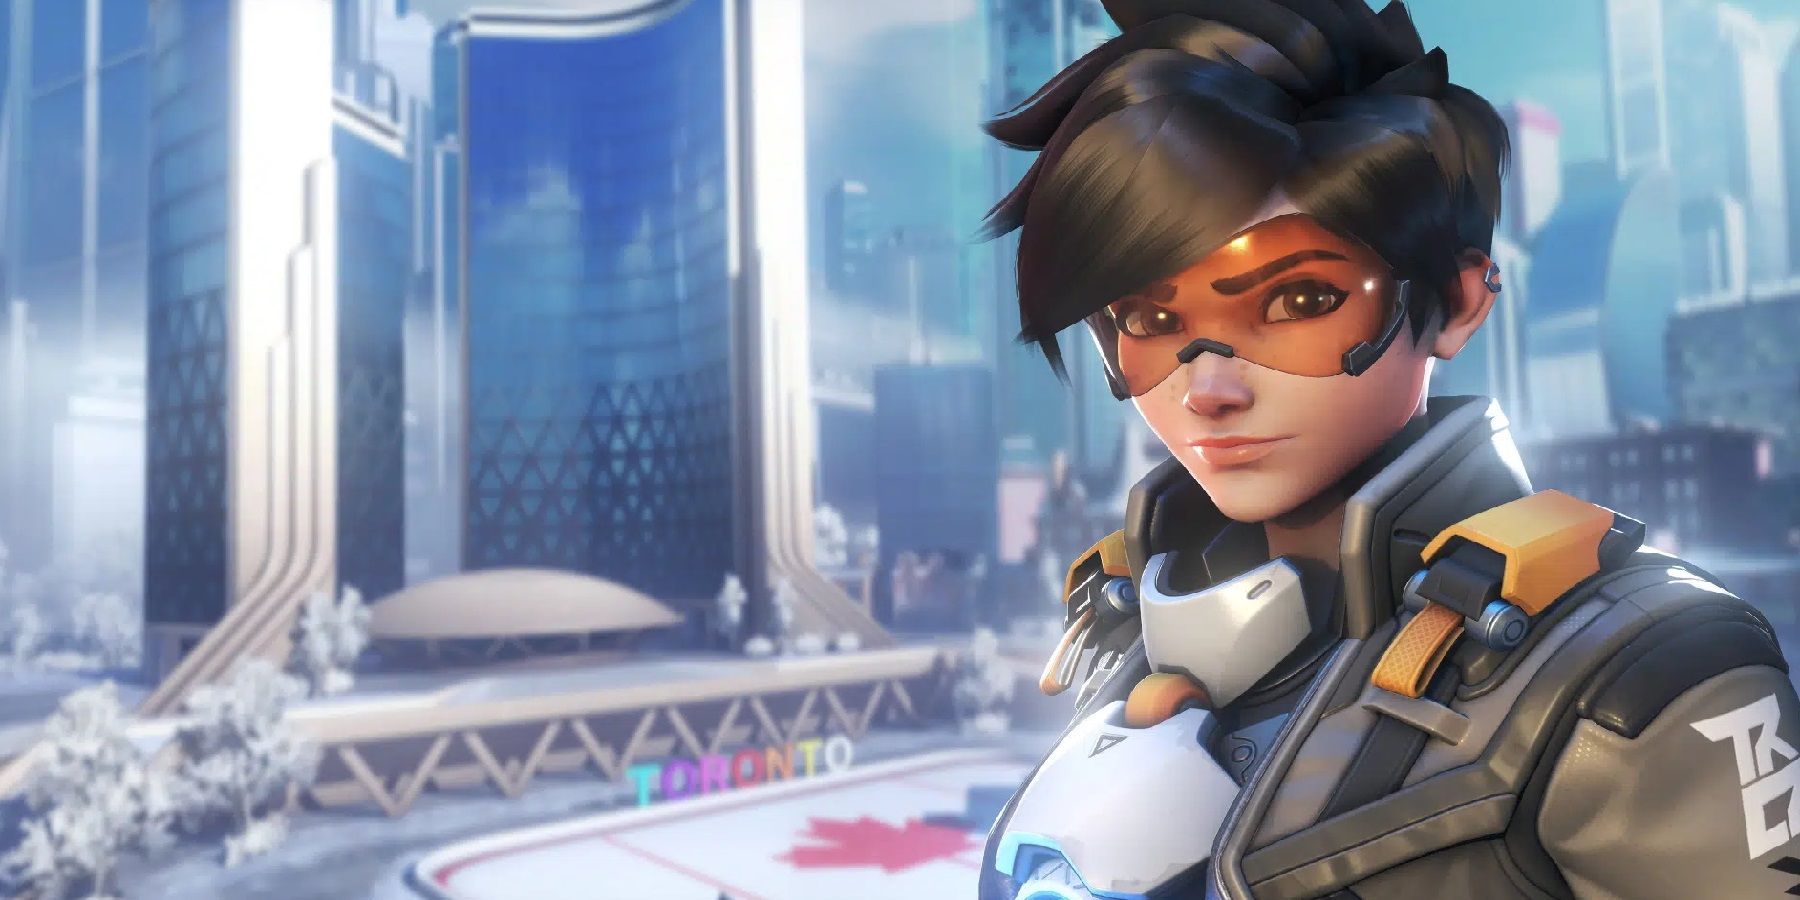 Overwatch 2 McDonald's Tie-In Gives Players Limited Tracer
Skin